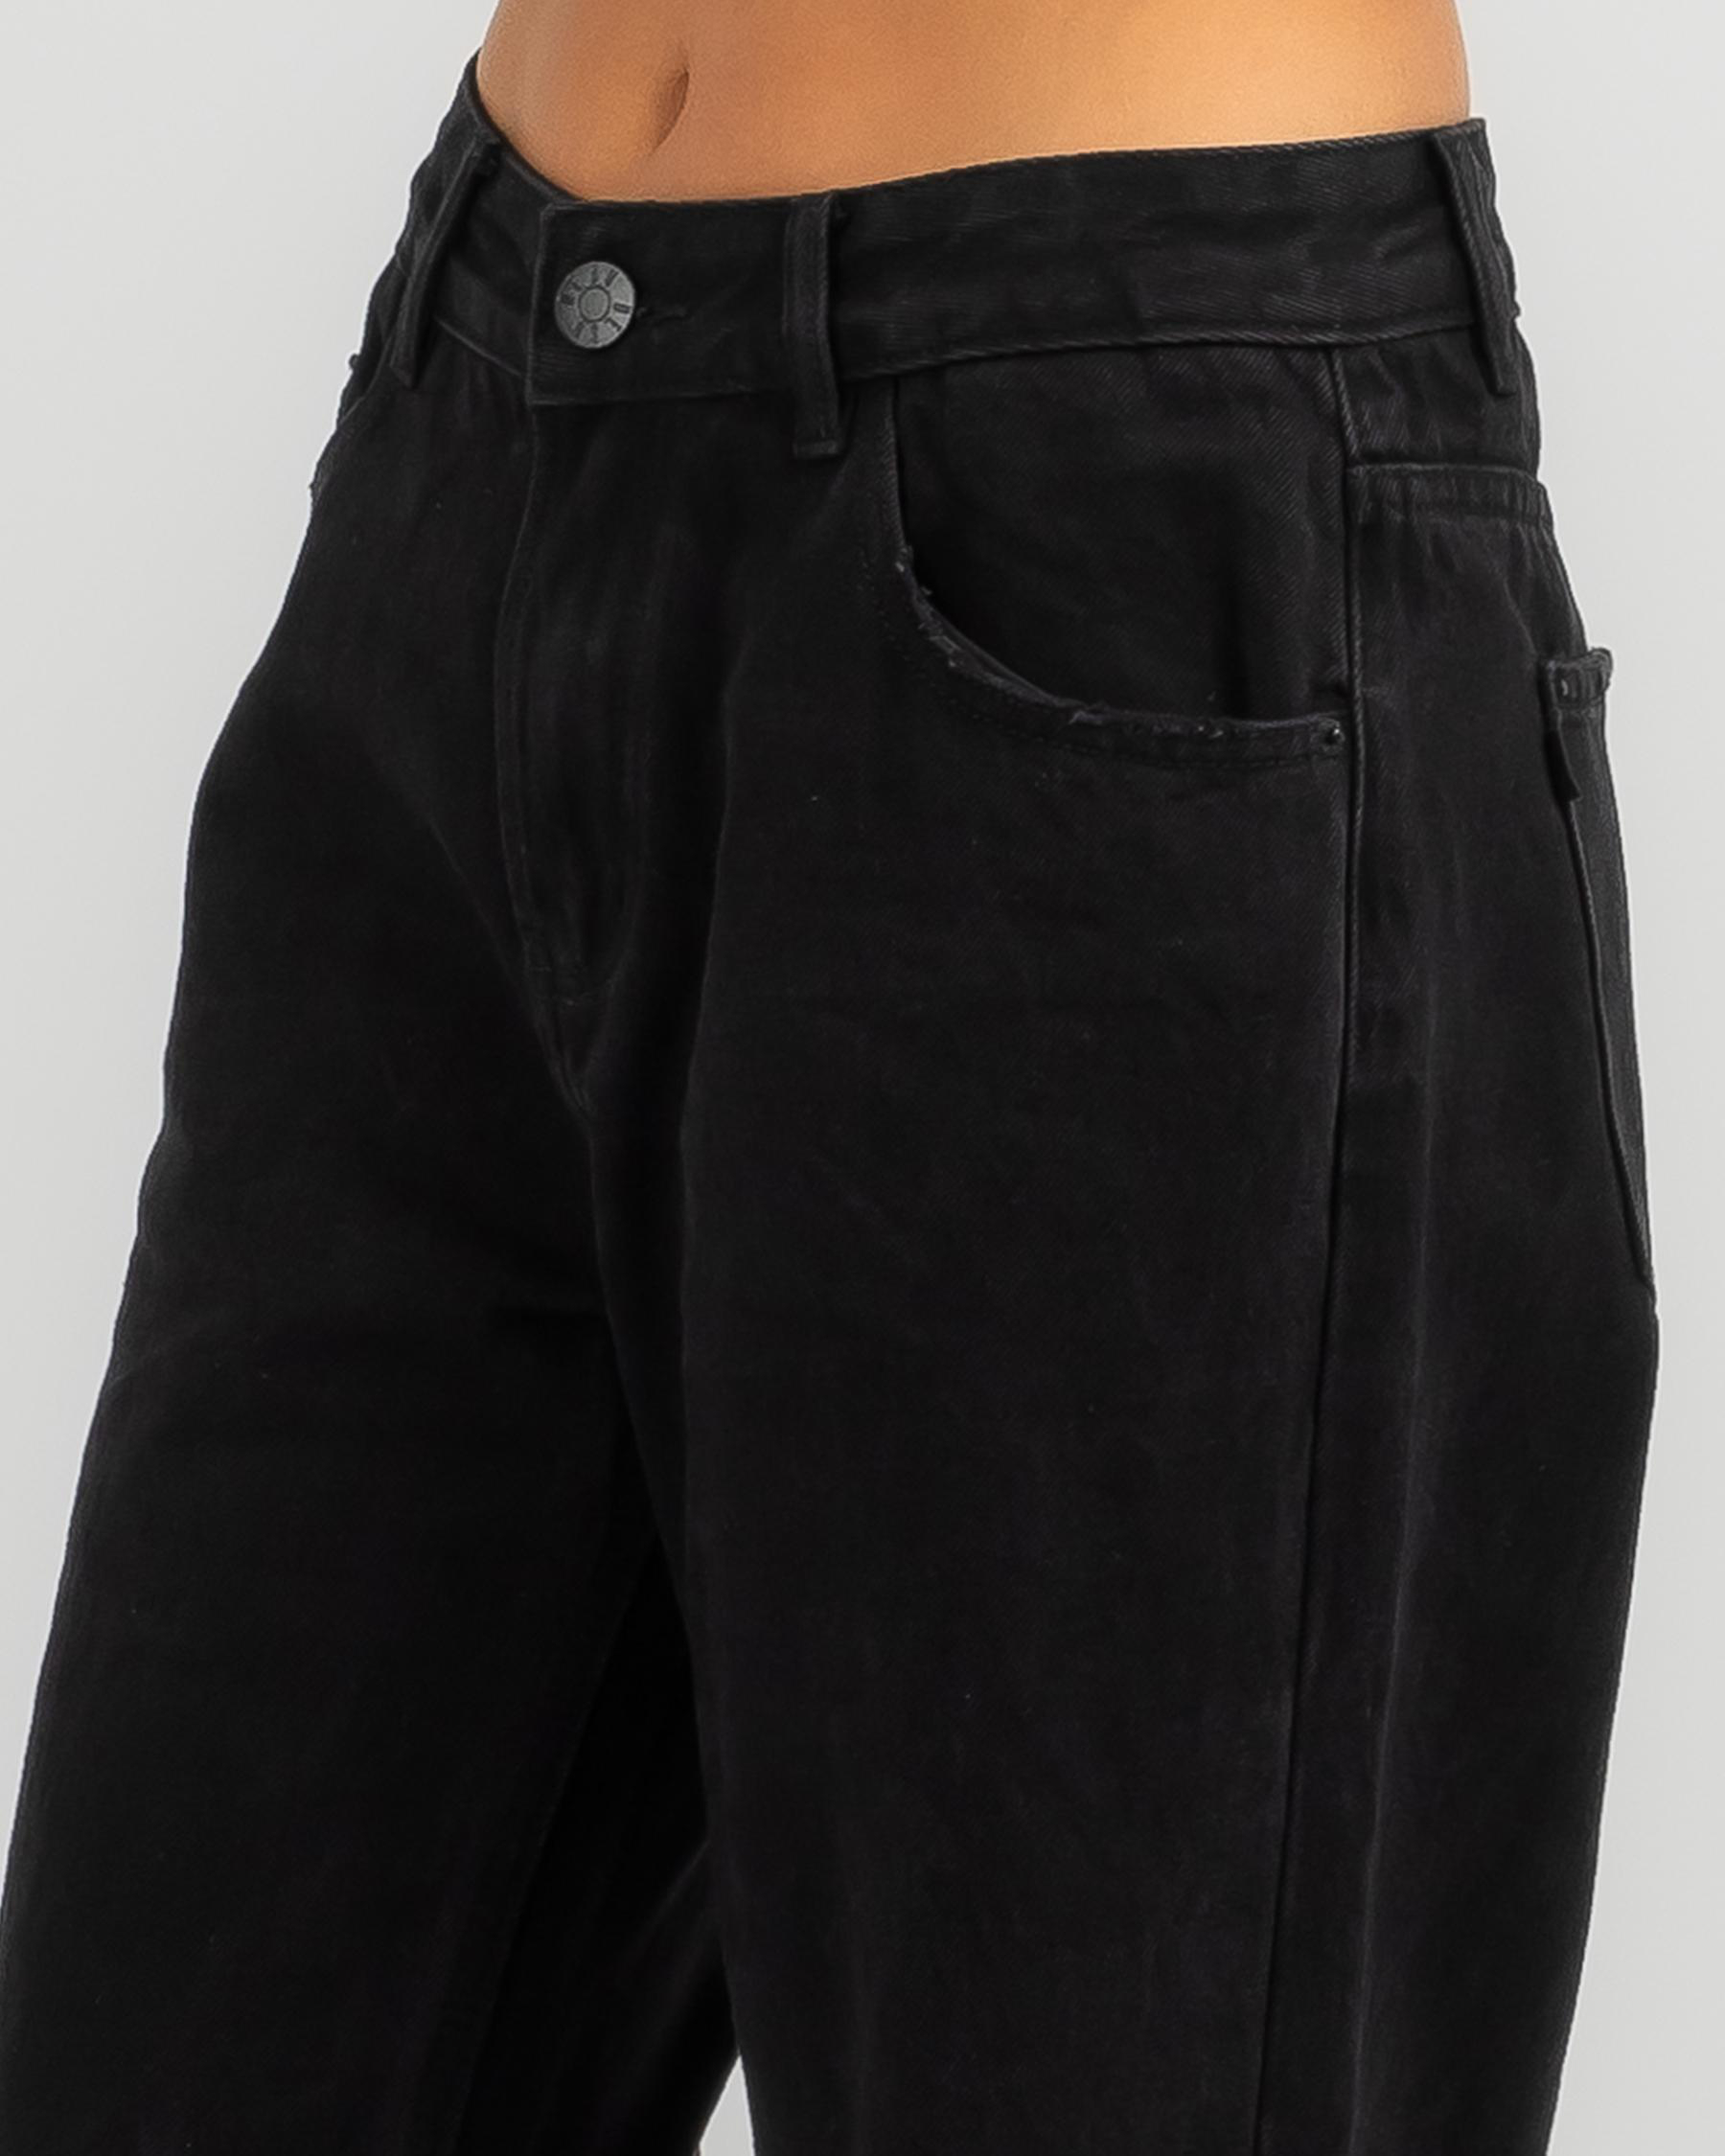 DESU Eden Jeans In Washed Black - FREE* Shipping & Easy Returns - City  Beach United States